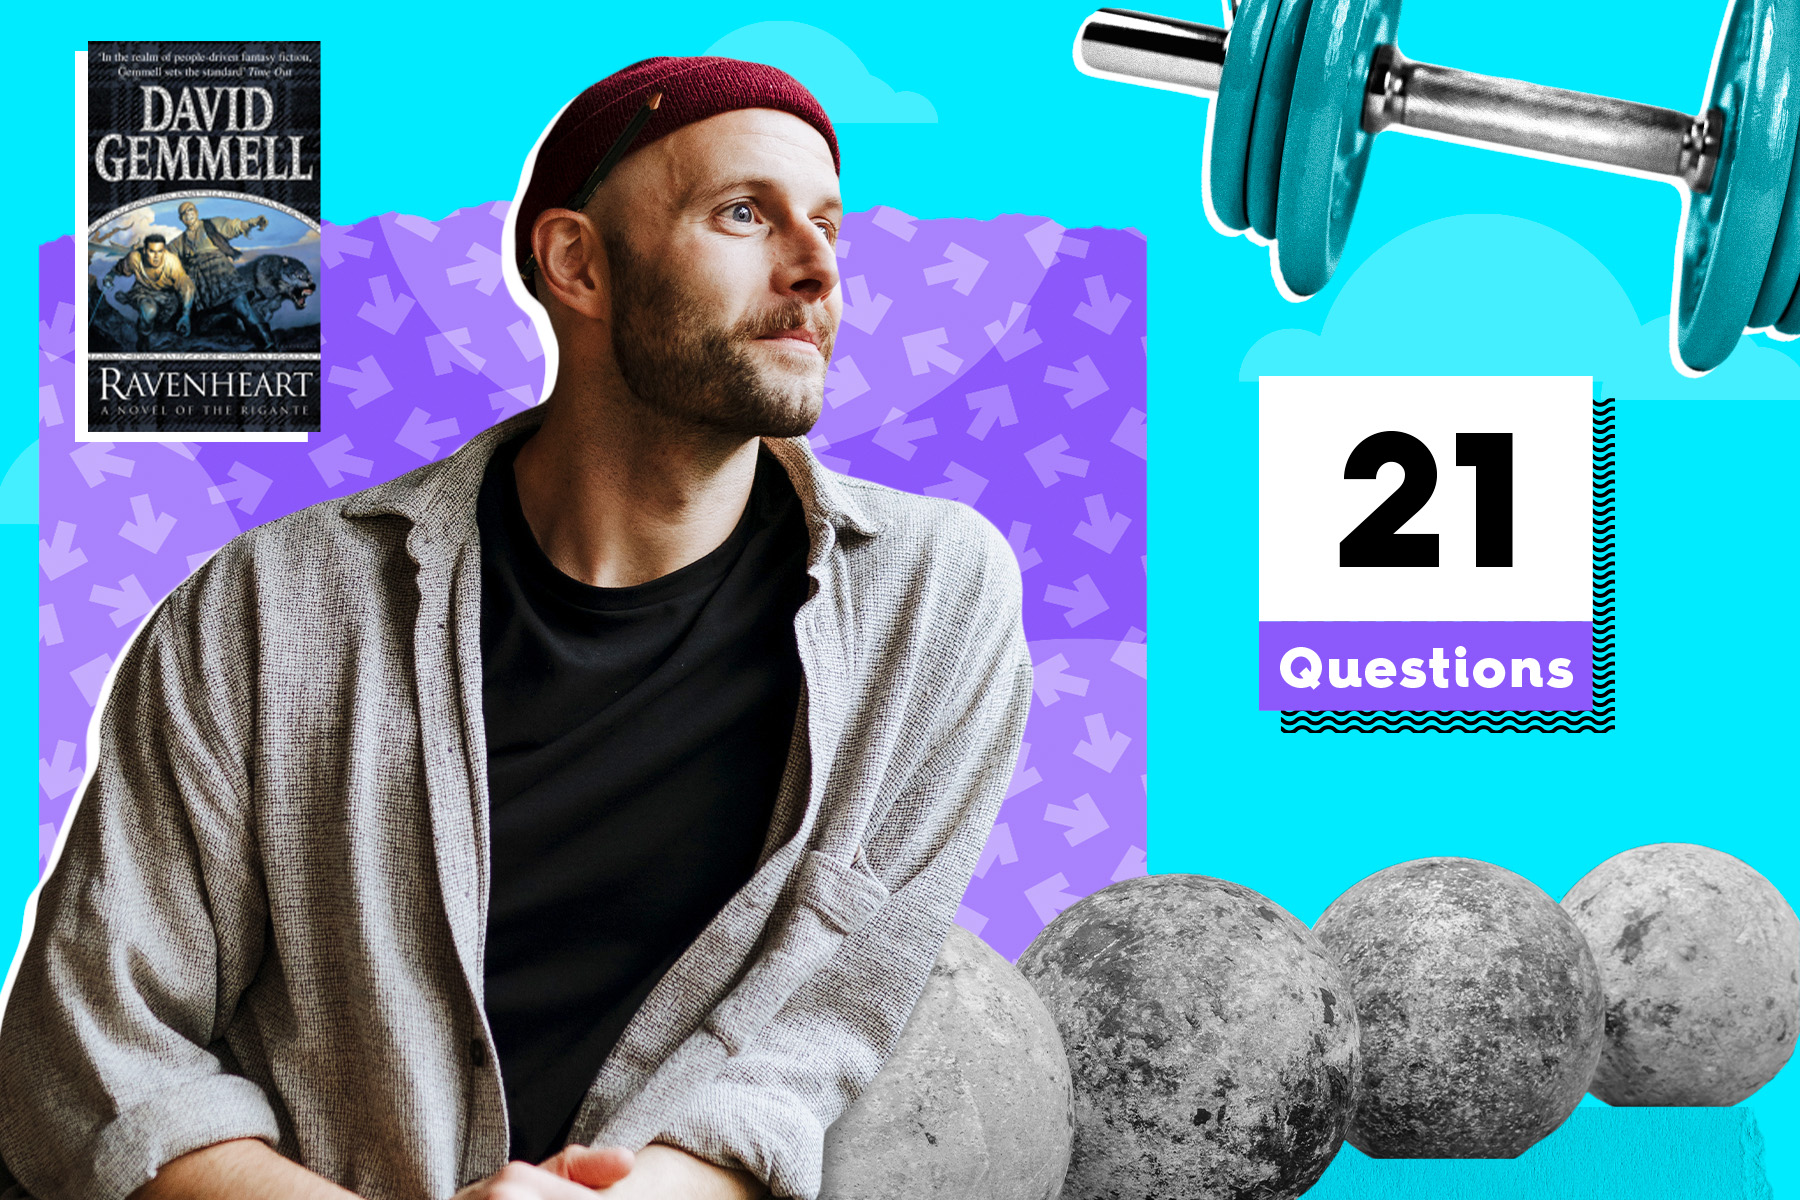 An image of author/illustrator Ben Rothery on a blue and purple patterned background. Surrounding him is the book cover of Ravenheart by David Gemmell, a dumbbell and four circular rocks that strongmen lift